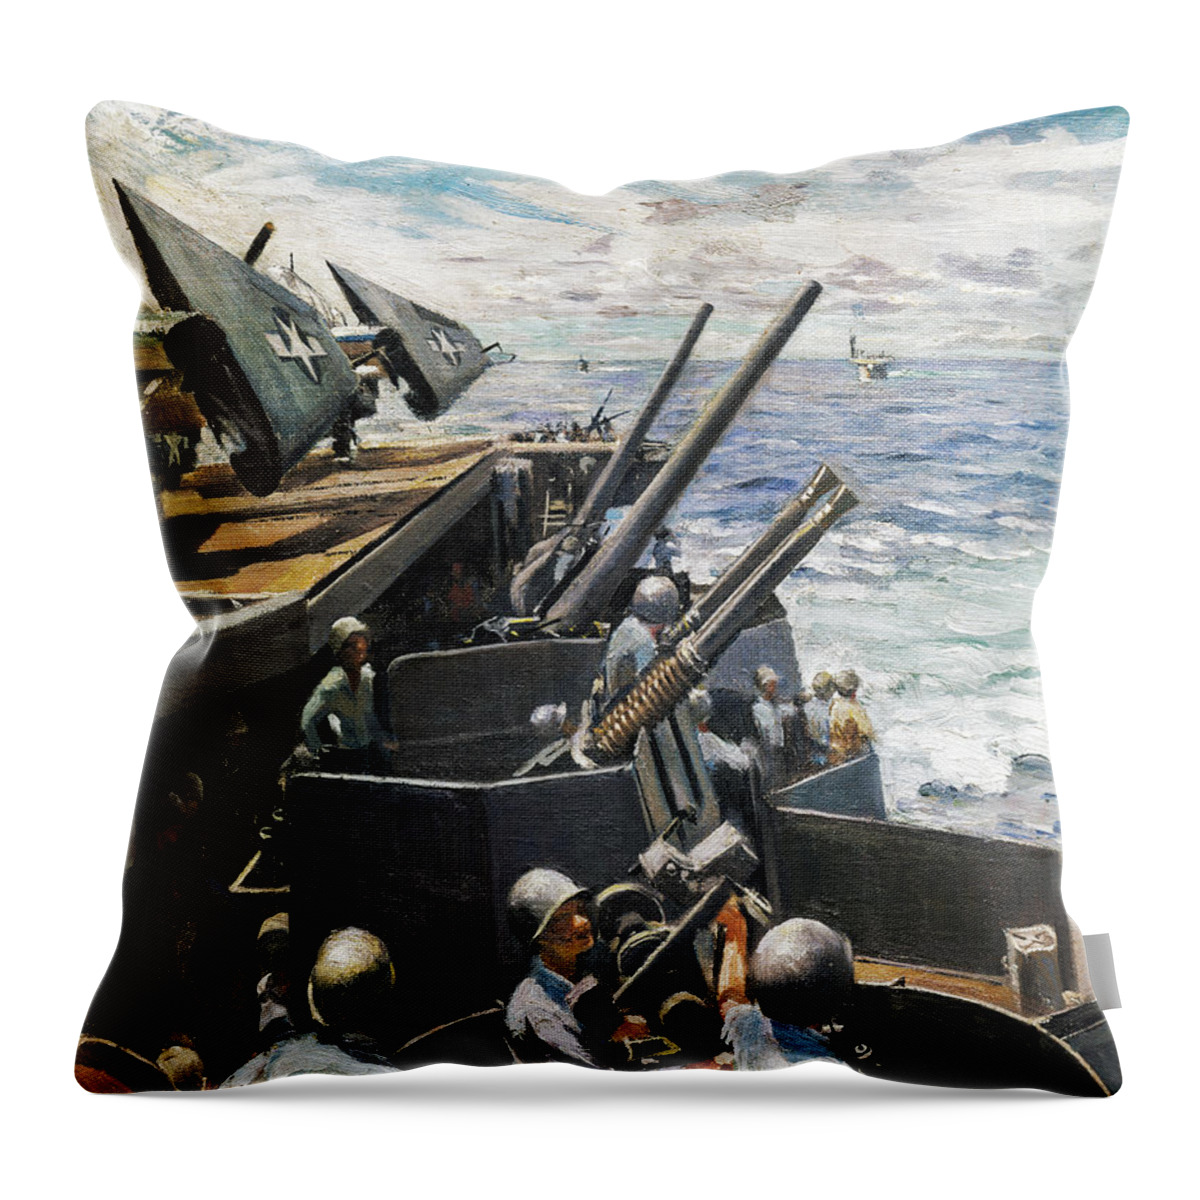 1944 Throw Pillow featuring the painting Wwii Aircraft Carrier by William Franklin Draper